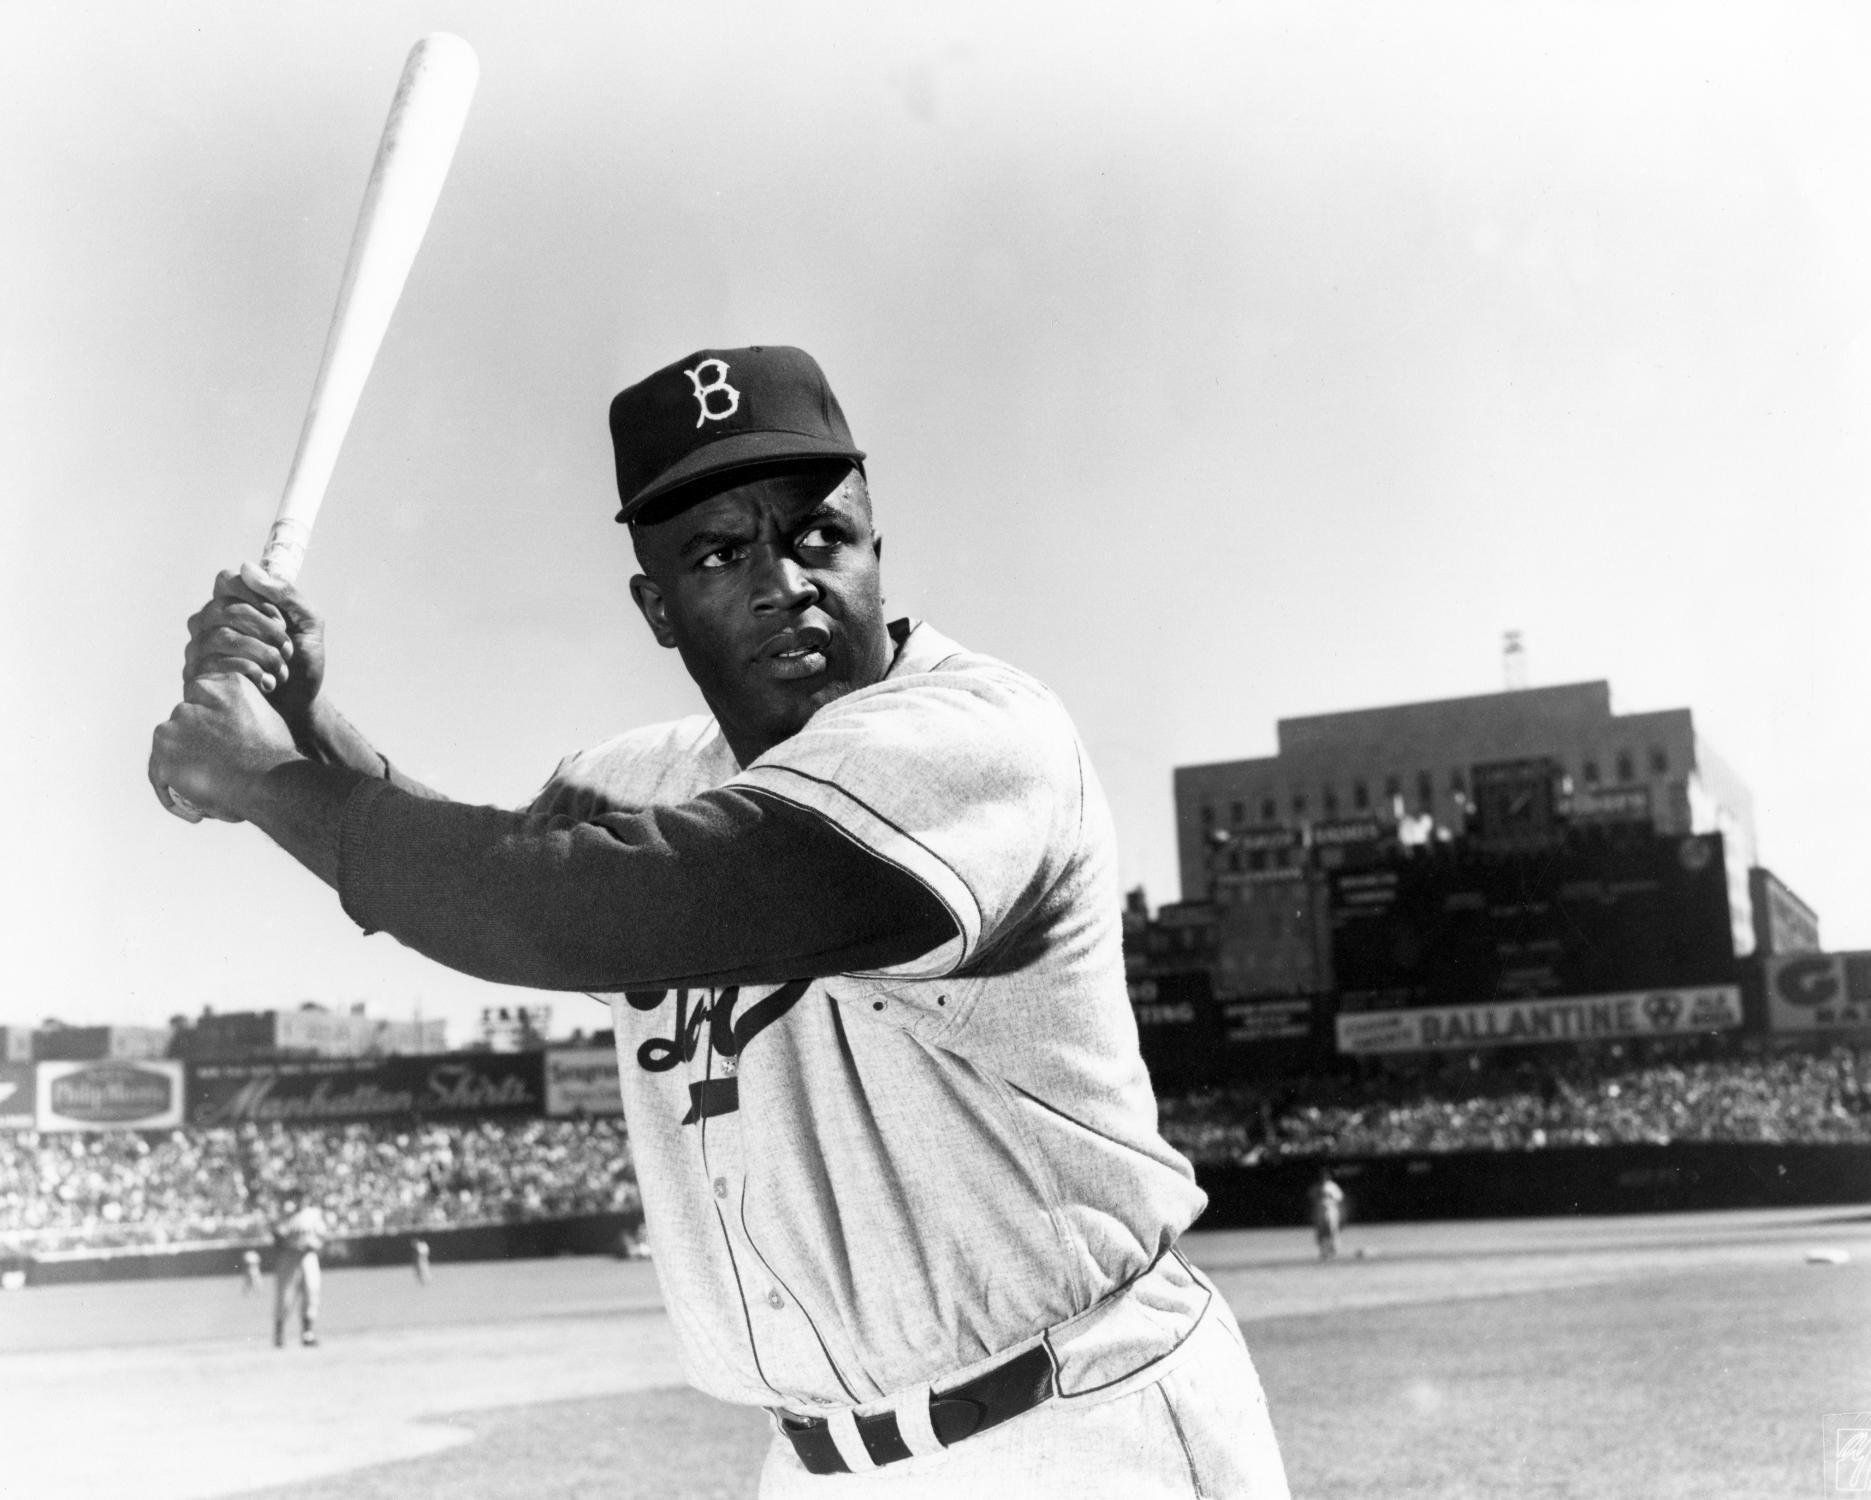 Nightengale: MLB to Celebrate Jackie Robinson’s 100th Birthday in 2019